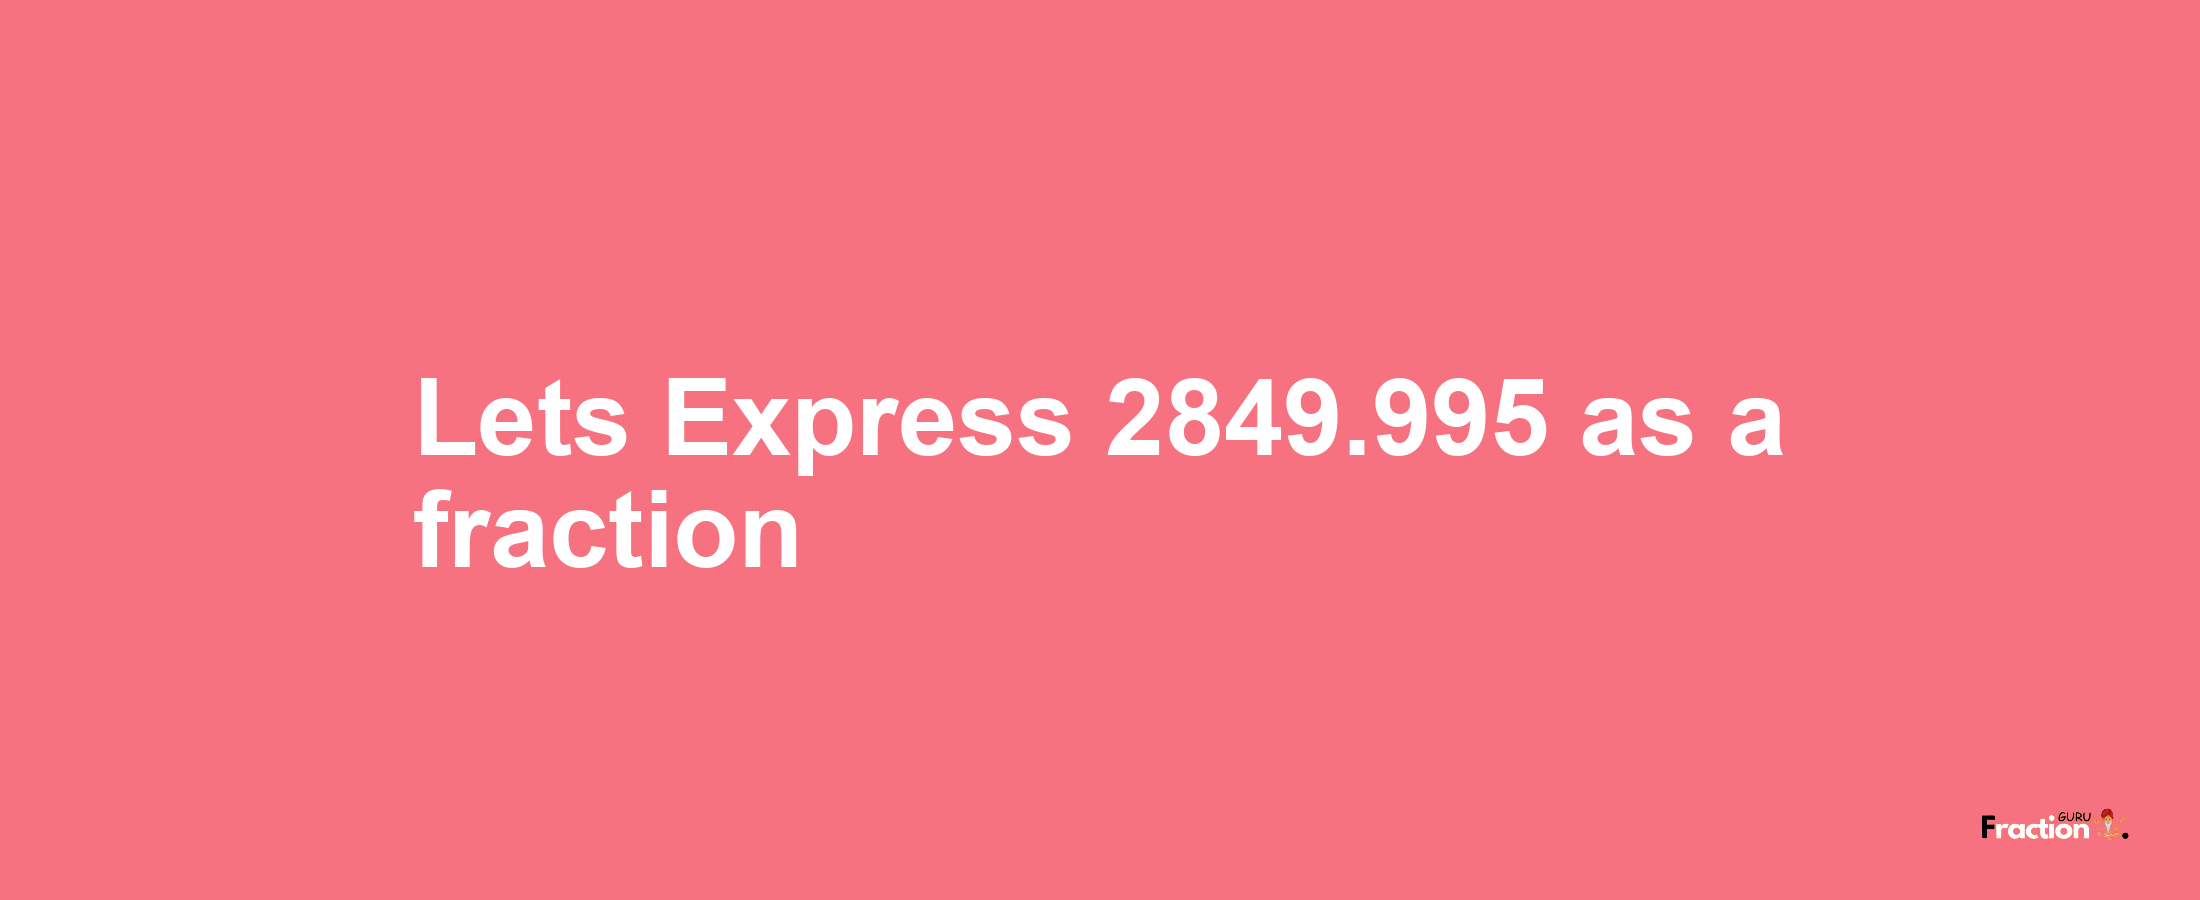 Lets Express 2849.995 as afraction